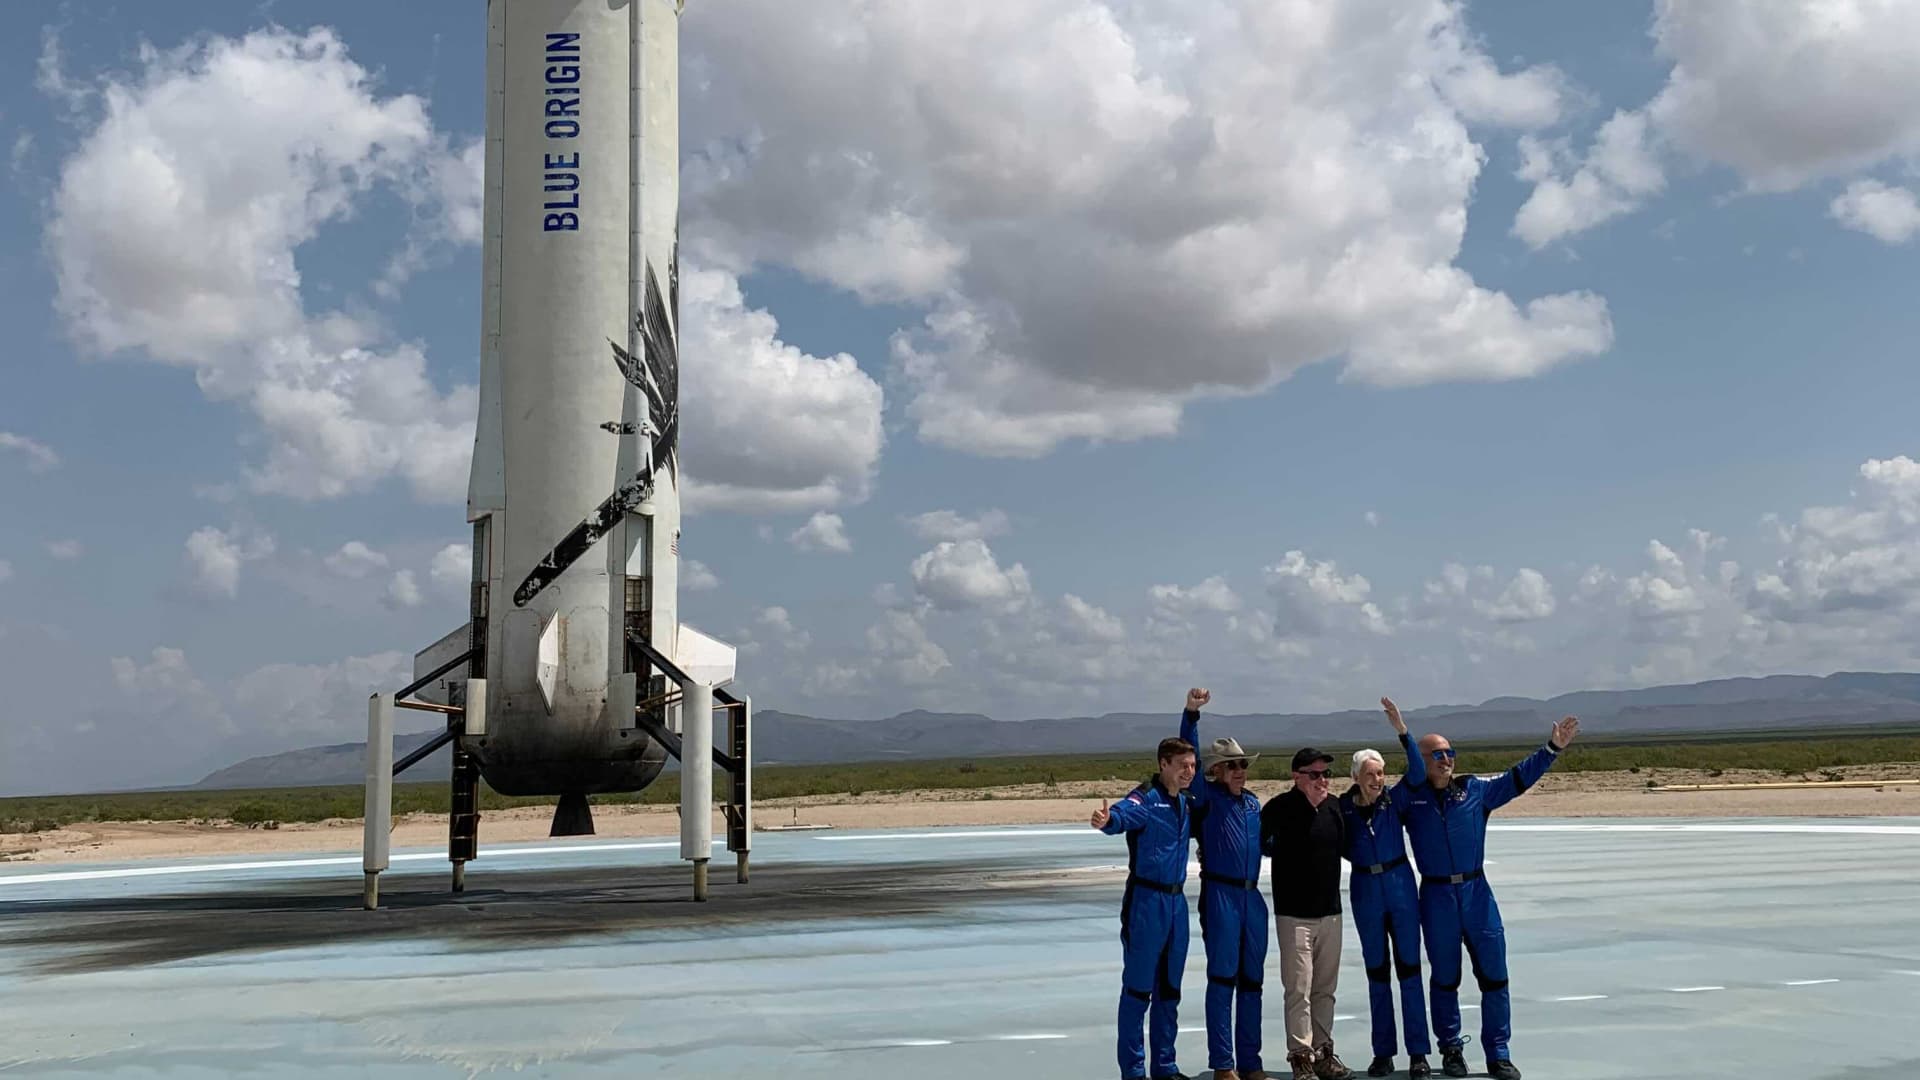 Jeff Bezos and his crew pose in front of the Blue Origin's New Shepard rocket on July 20th, 2021.